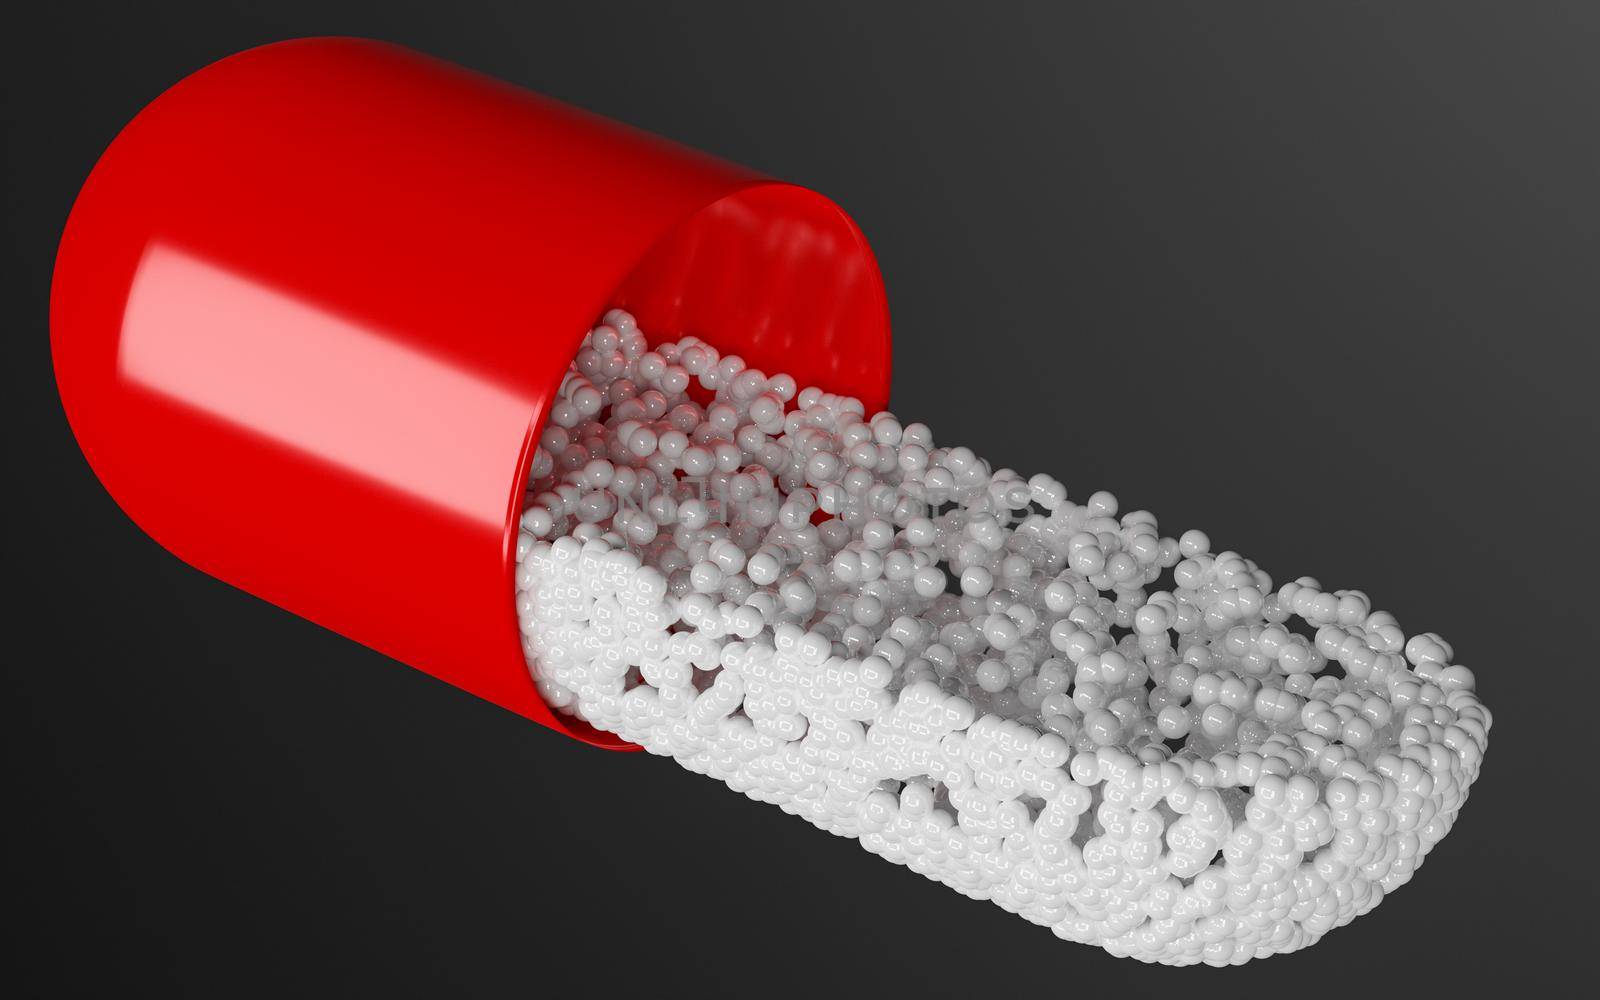 red medicine capsule opened with the contents coming out of it on a black background. 3d render